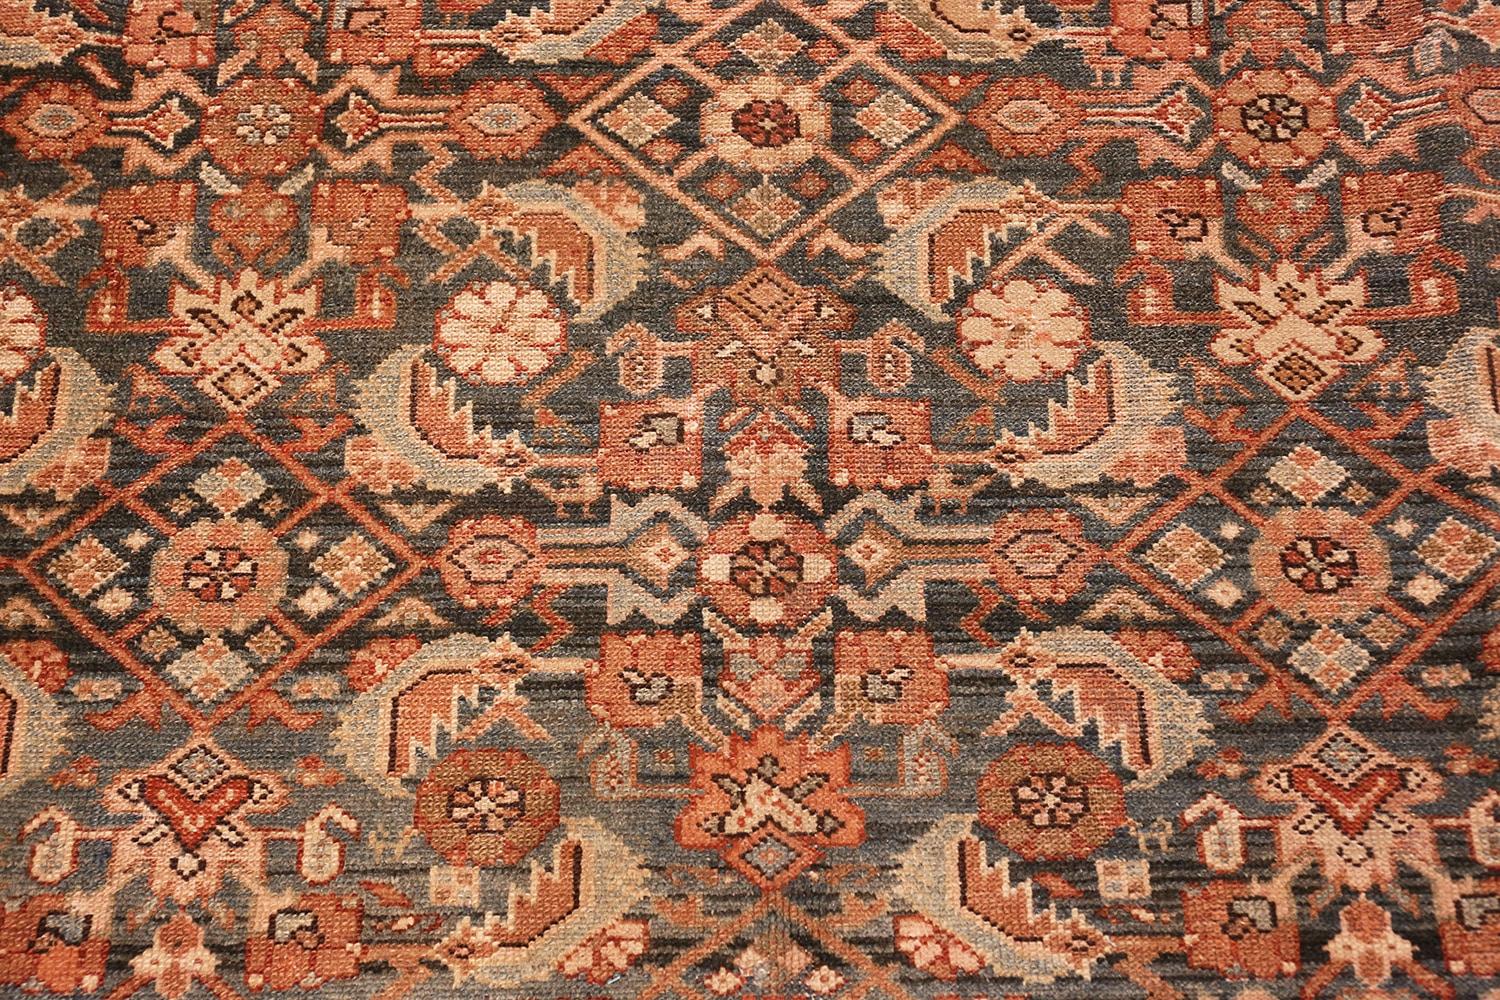 Wool Antique Tribal Persian Malayer Rug. Size: 6' 6